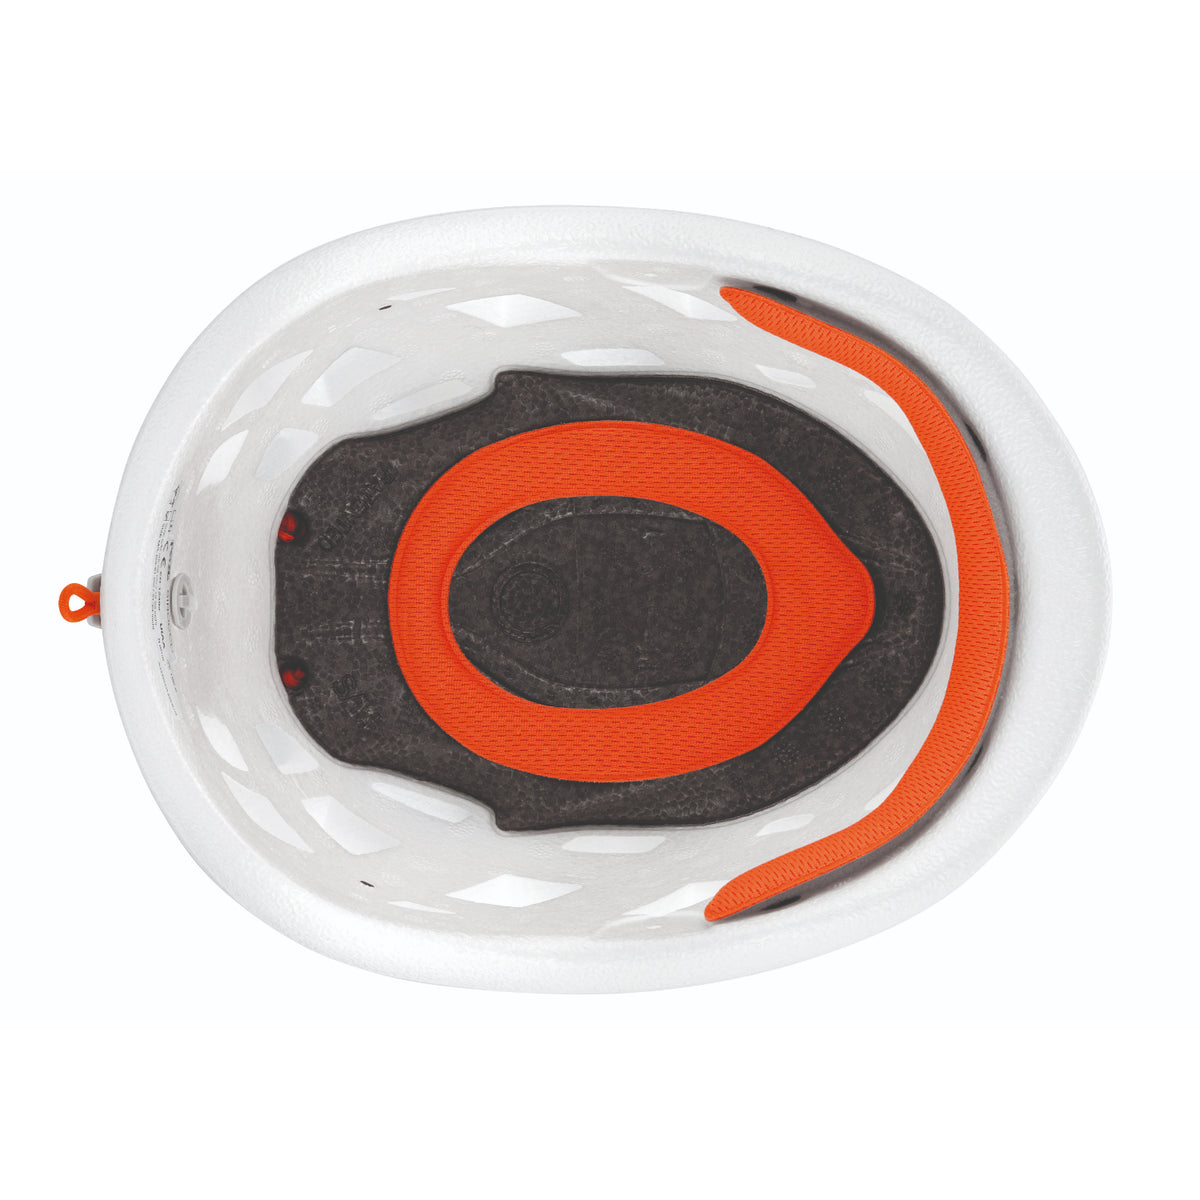 Petzl Sirocco in white and orange showing internal construction